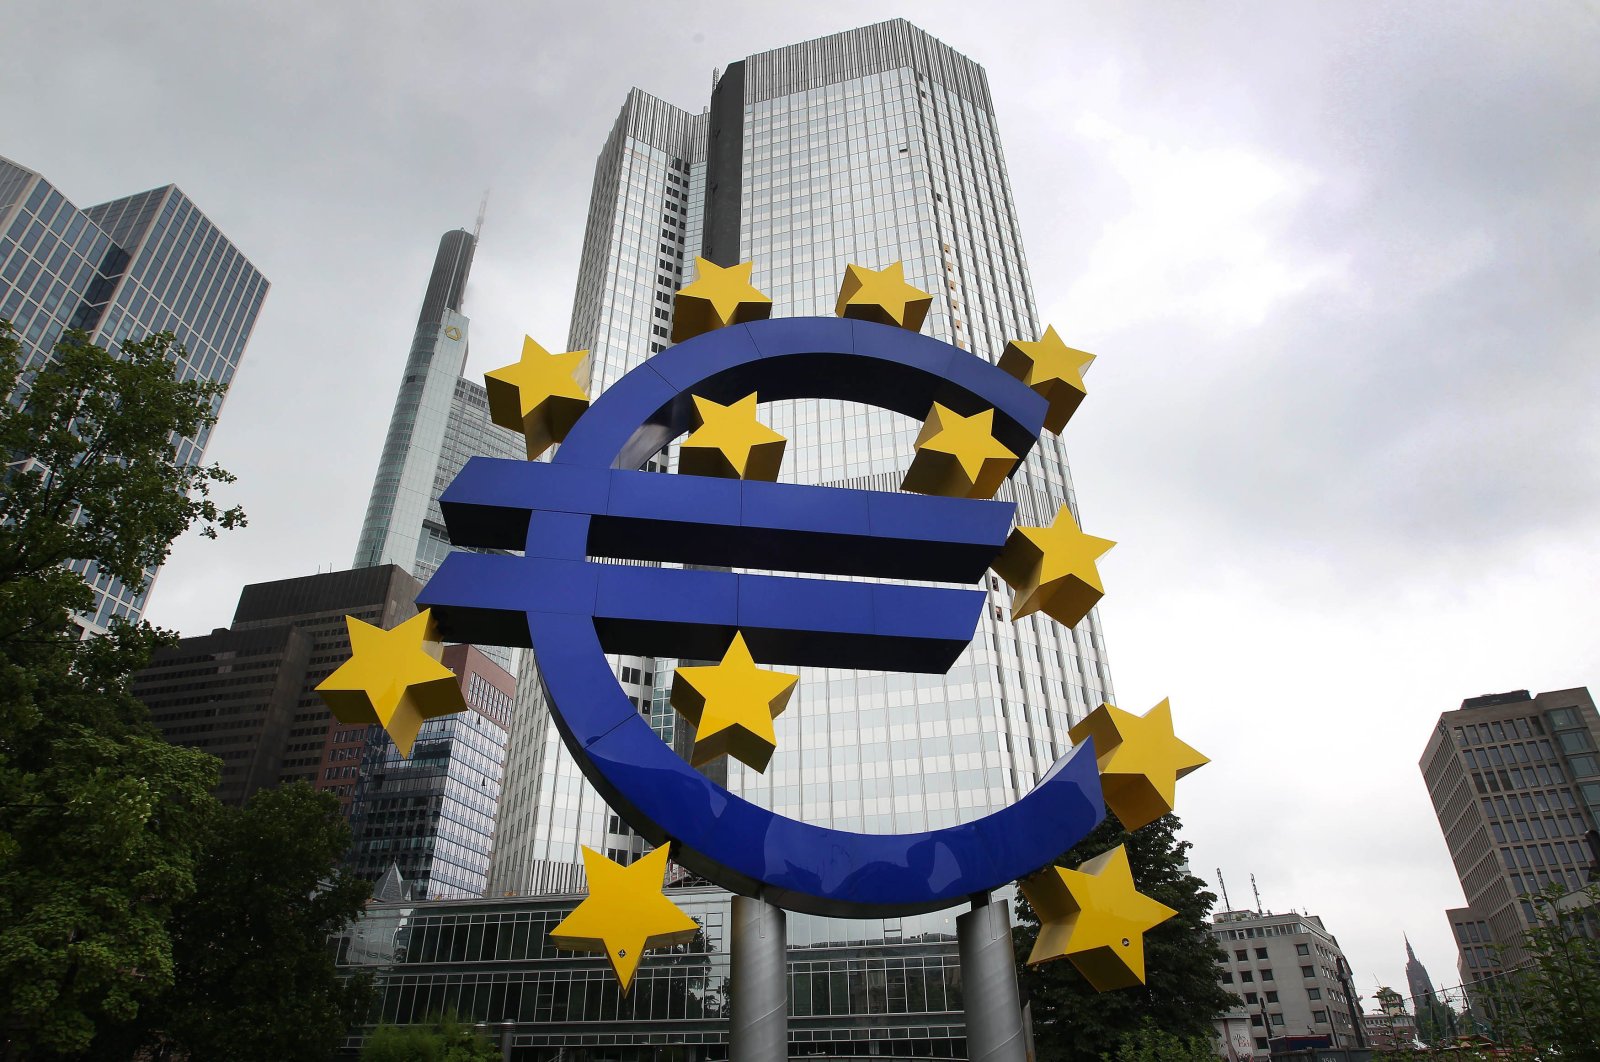 The logo of the Euro currency in front of the former headquarters of the European Central Bank (ECB) in Frankfurt am Main, western Germany, July 20, 2015. (AFP Photo)